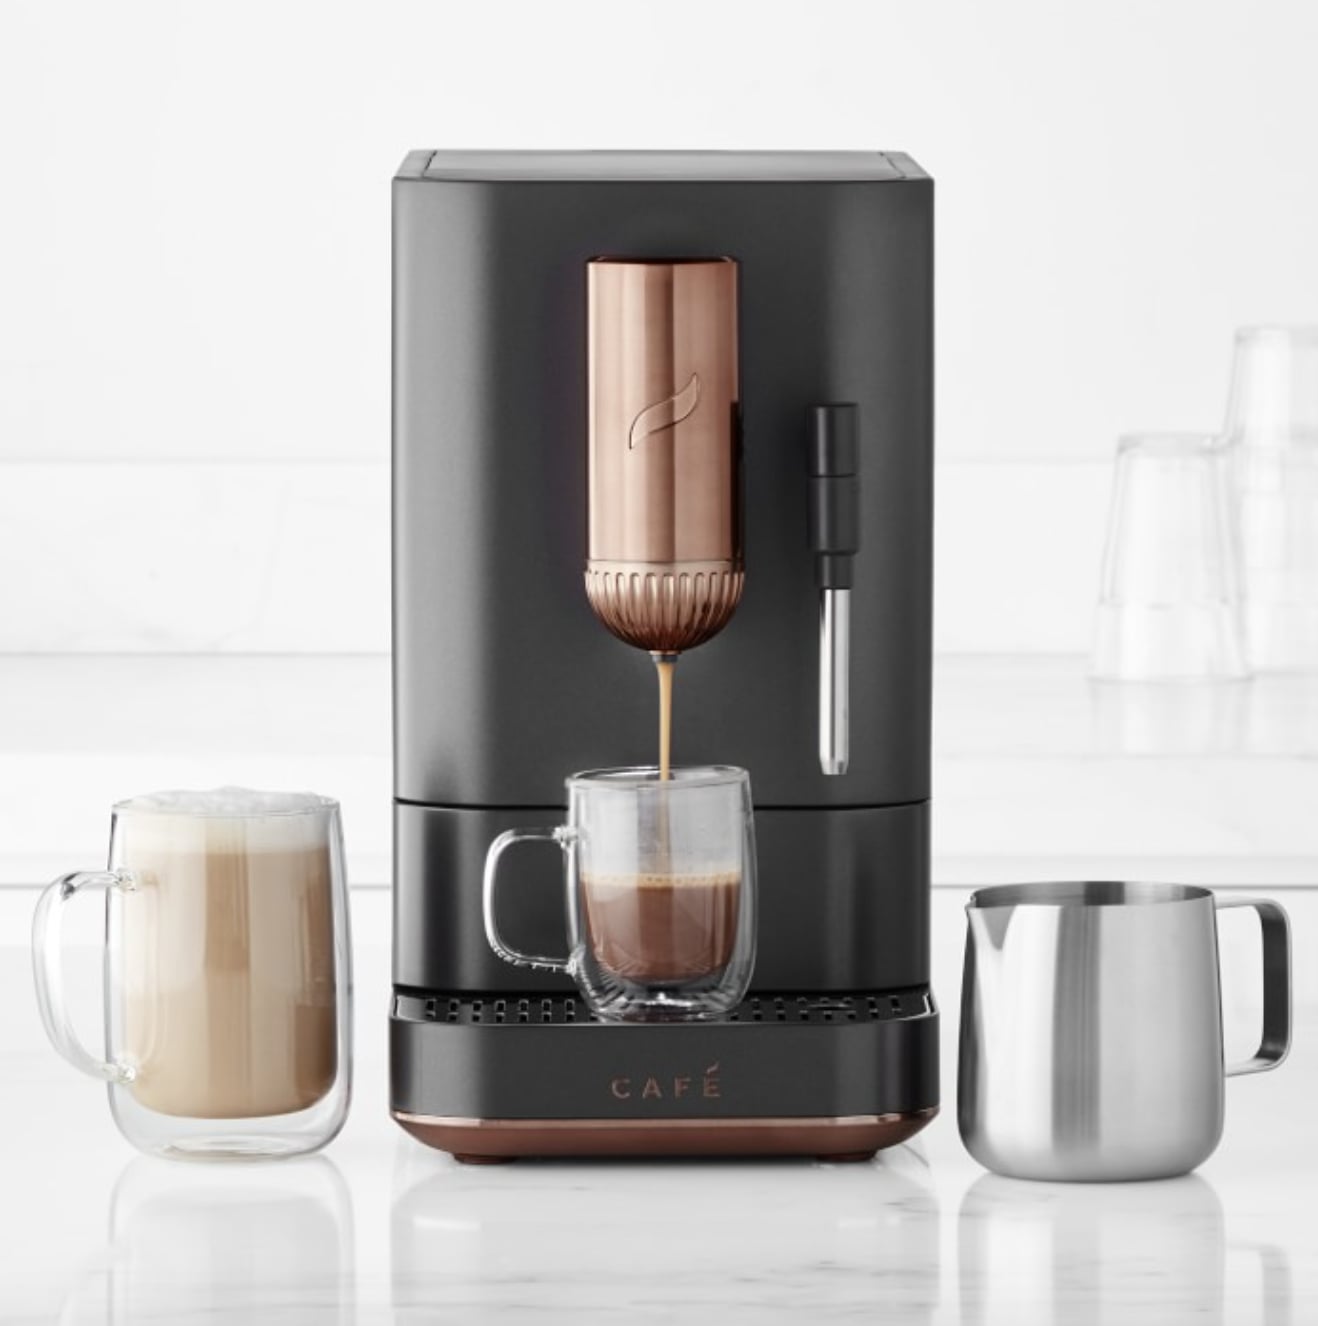 Best Stylish Coffee Makers That Aren't Ugly